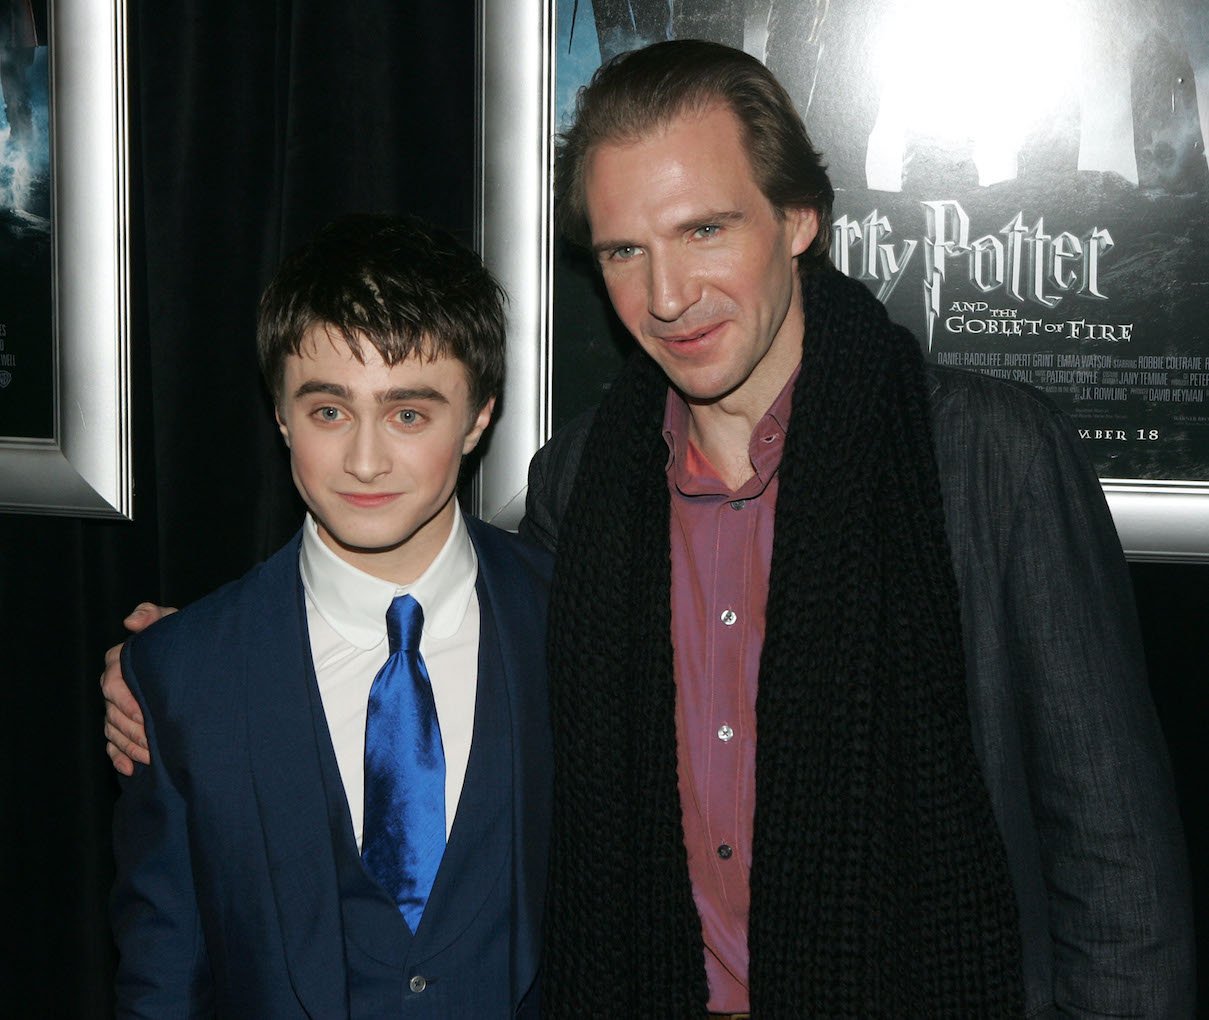 Daniel Radcliffe and Ralph Fiennes at the premiere of 'Harry Potter and the Goblet of Fire'